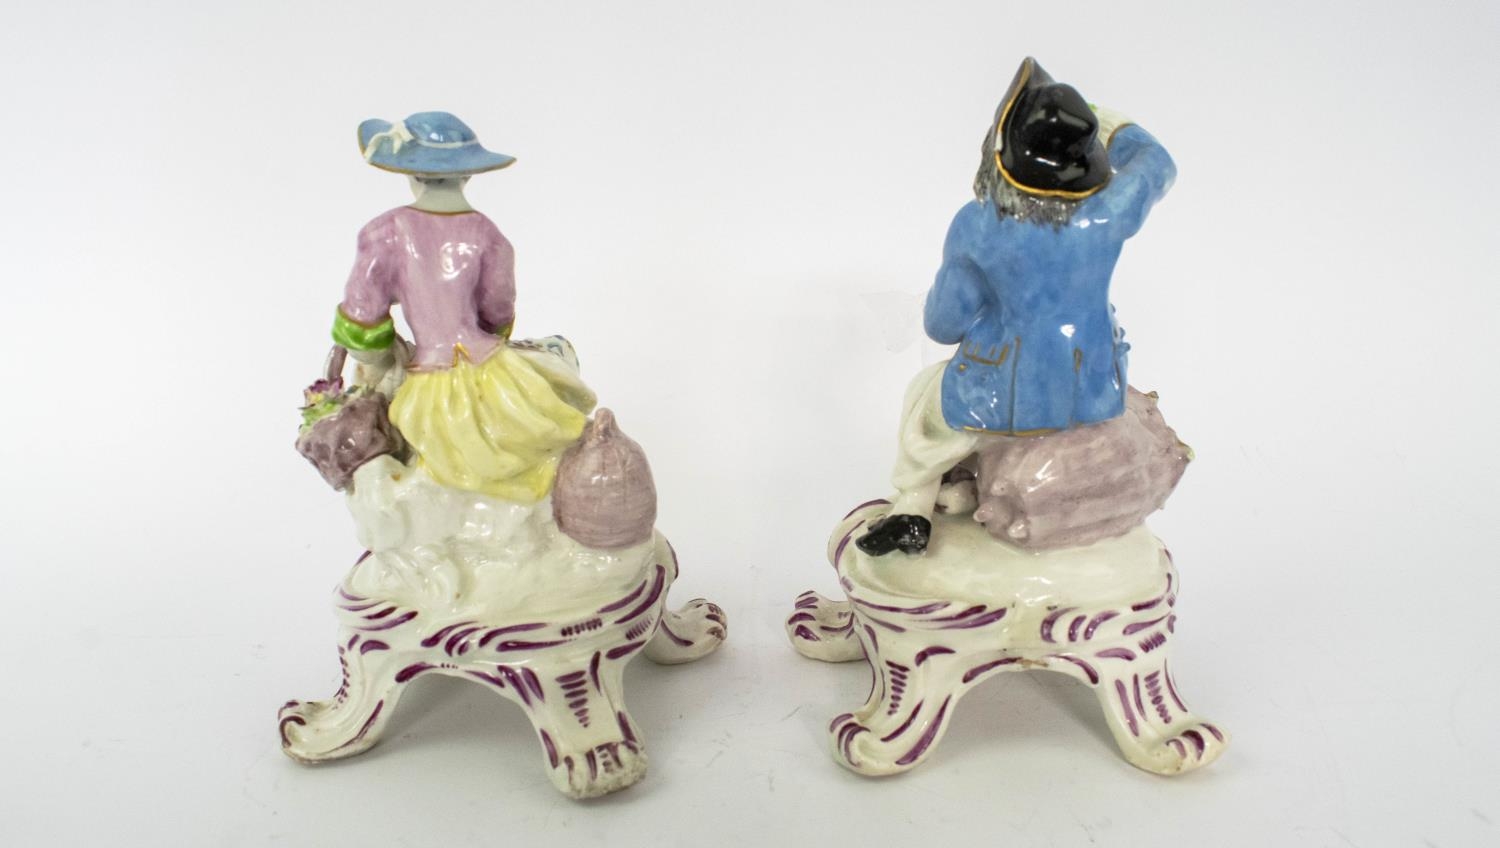 BOW PORCELAIN FIGURES, late 18th century Rococo, a lady with a basket of flowers and a gentleman - Image 5 of 6